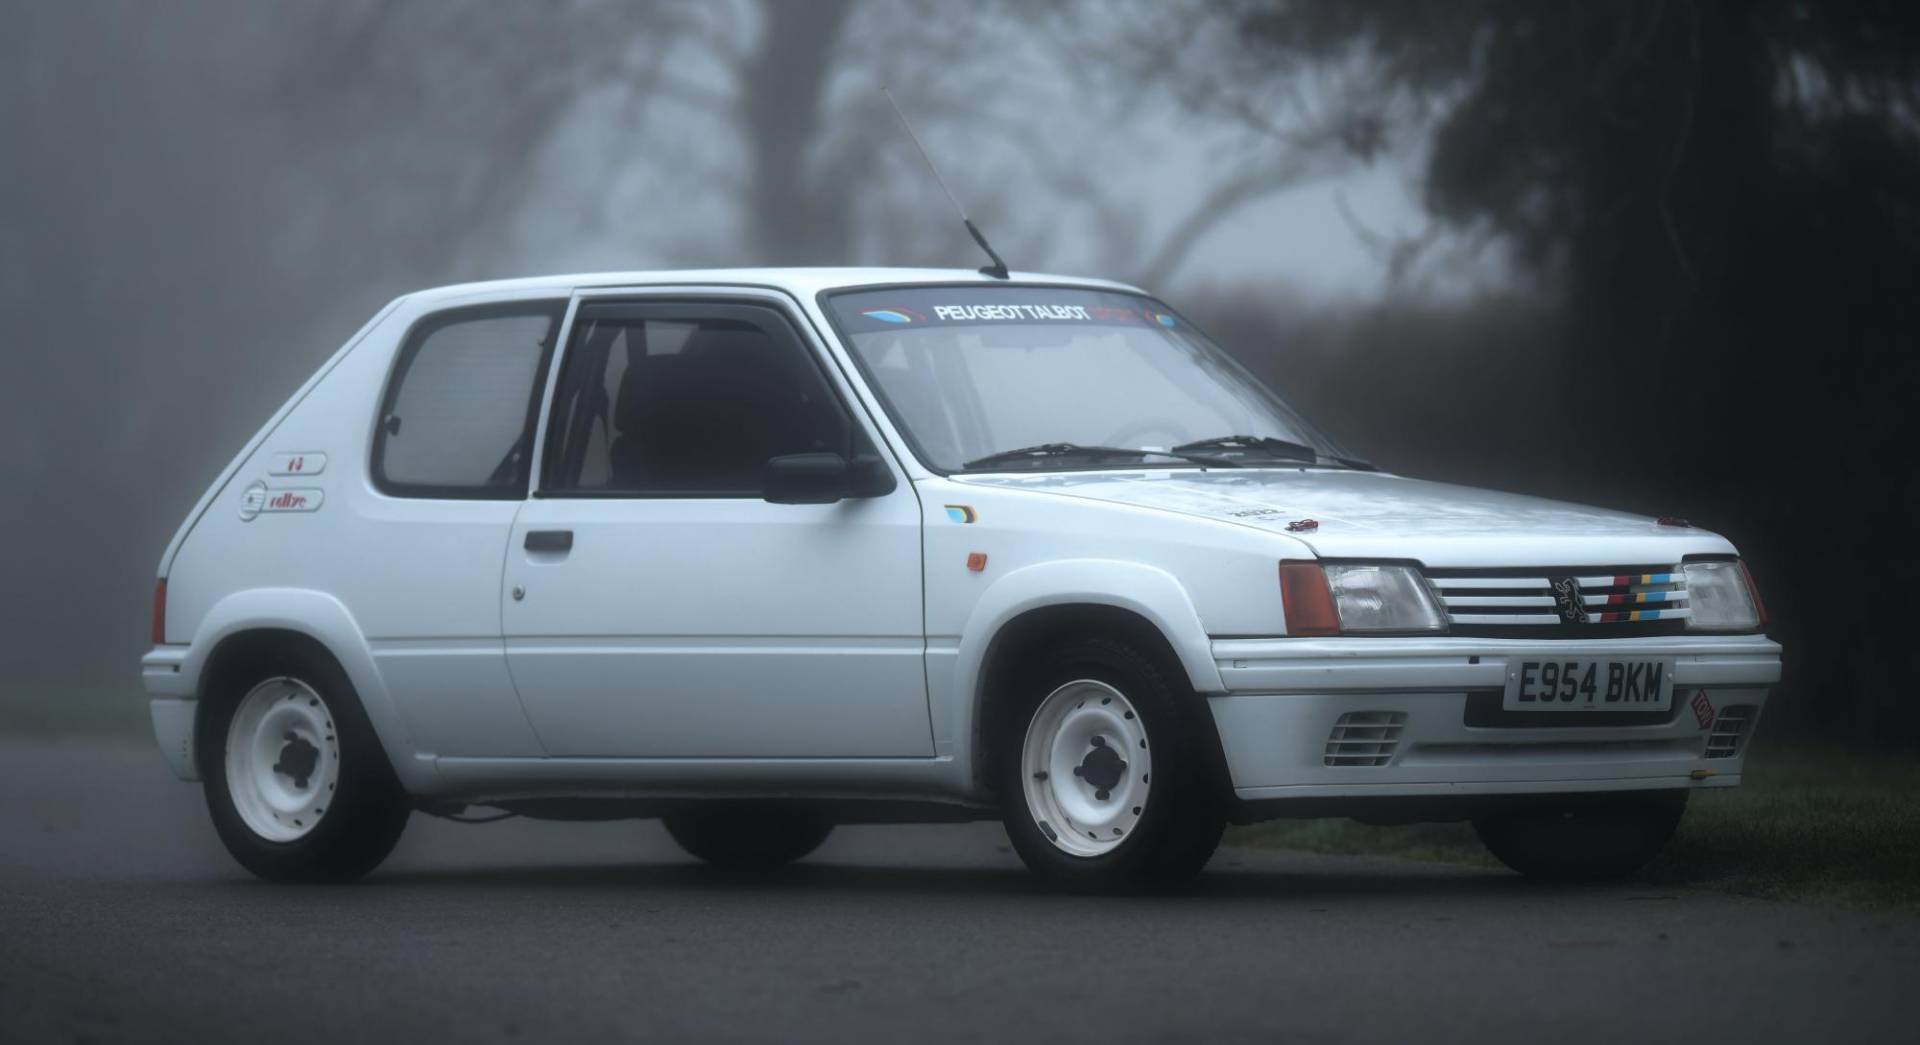 Peugeot 205 GTI  All you need to know  All cars news